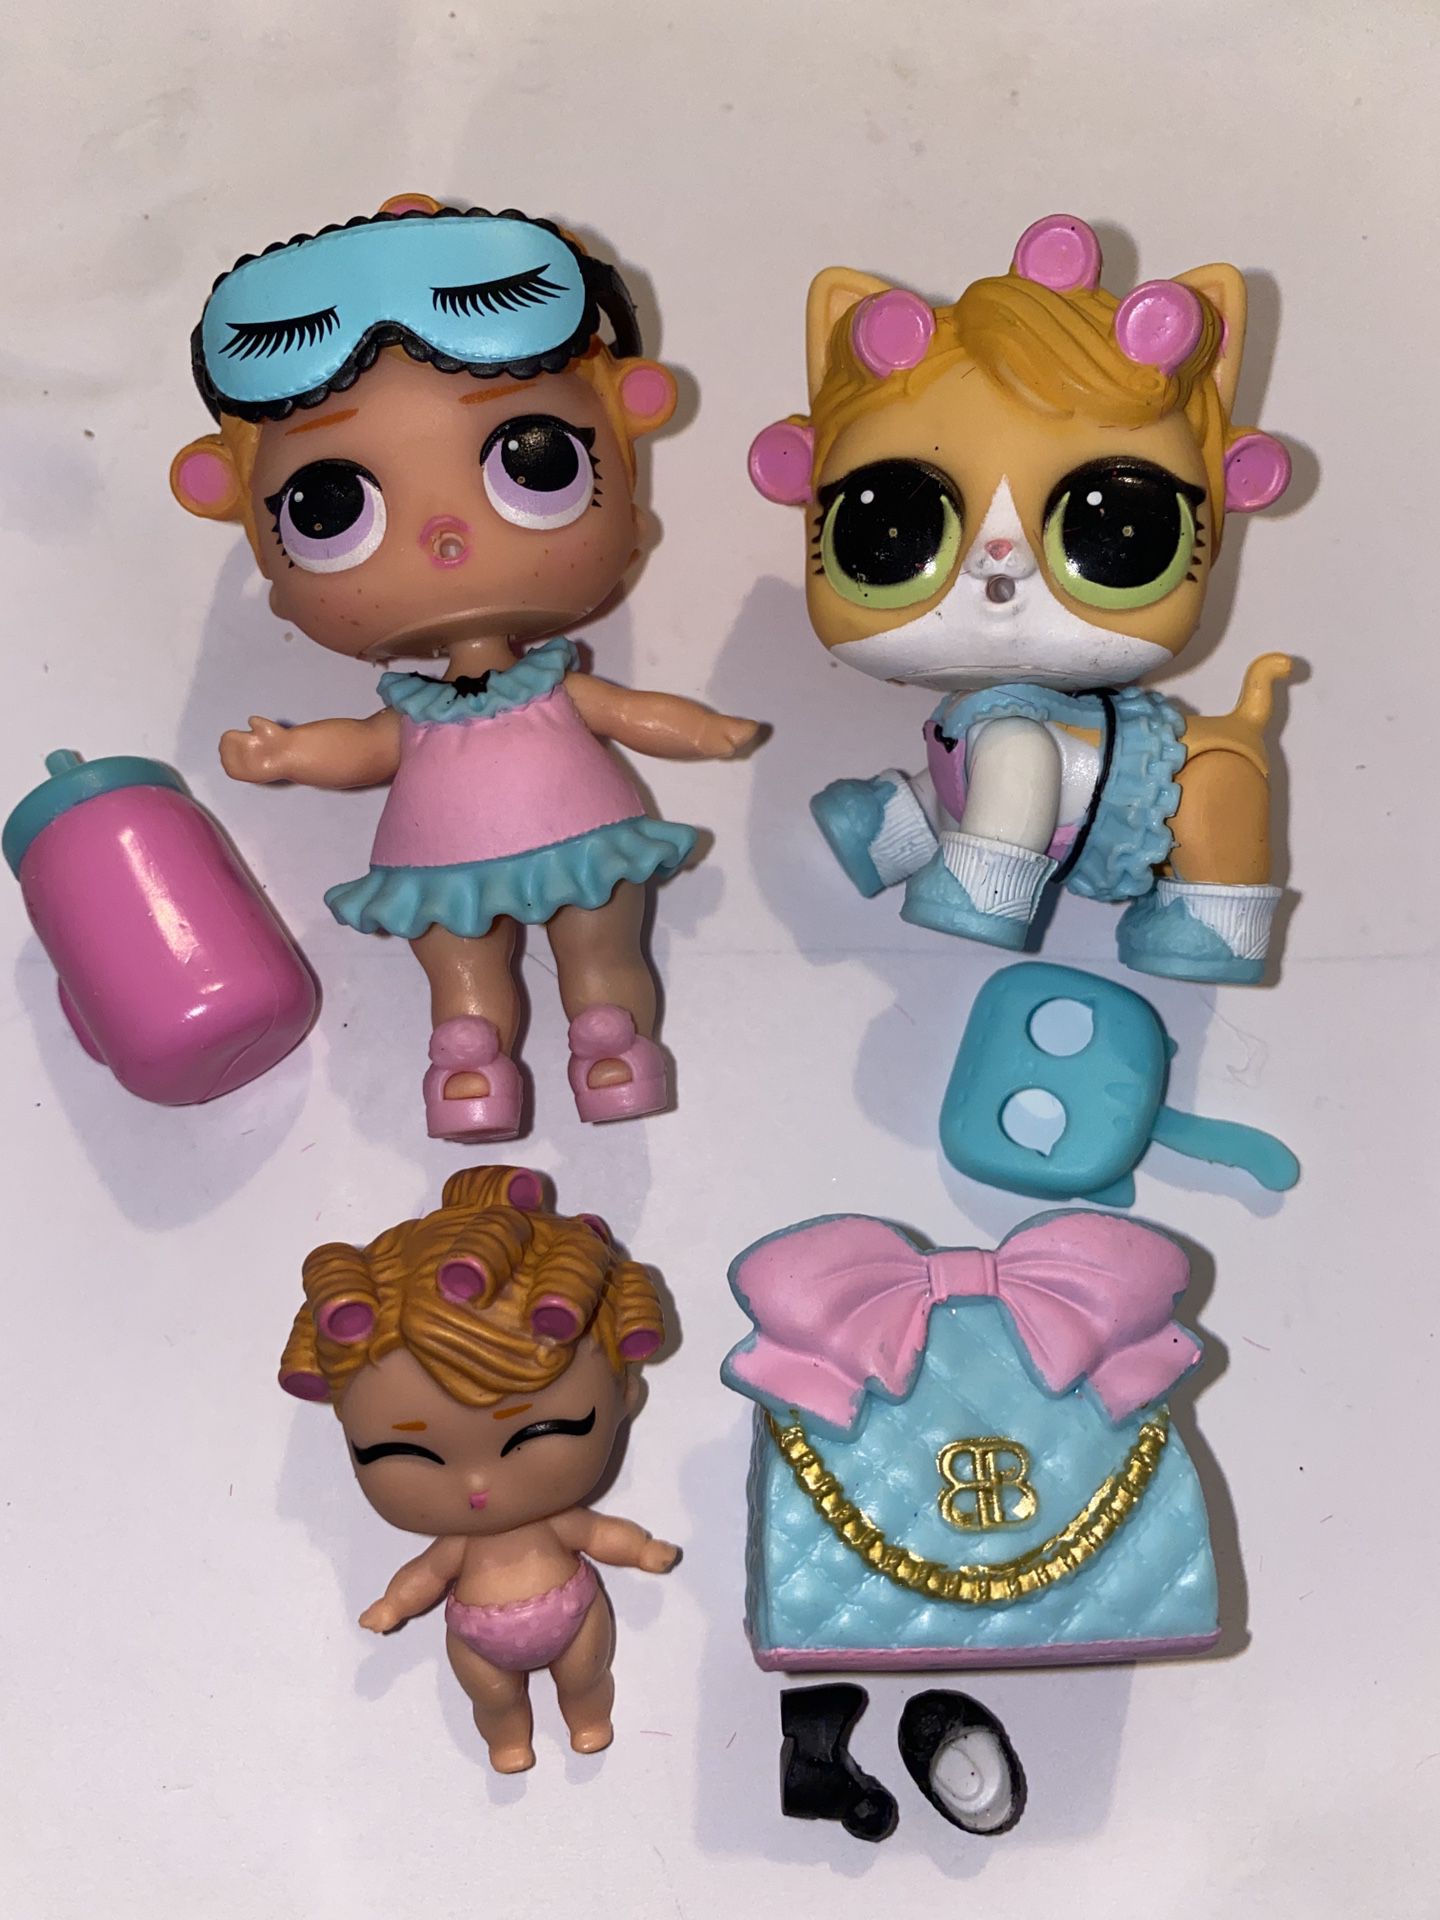 Lol series 3 “babydoll” lil sis, and kitty doll